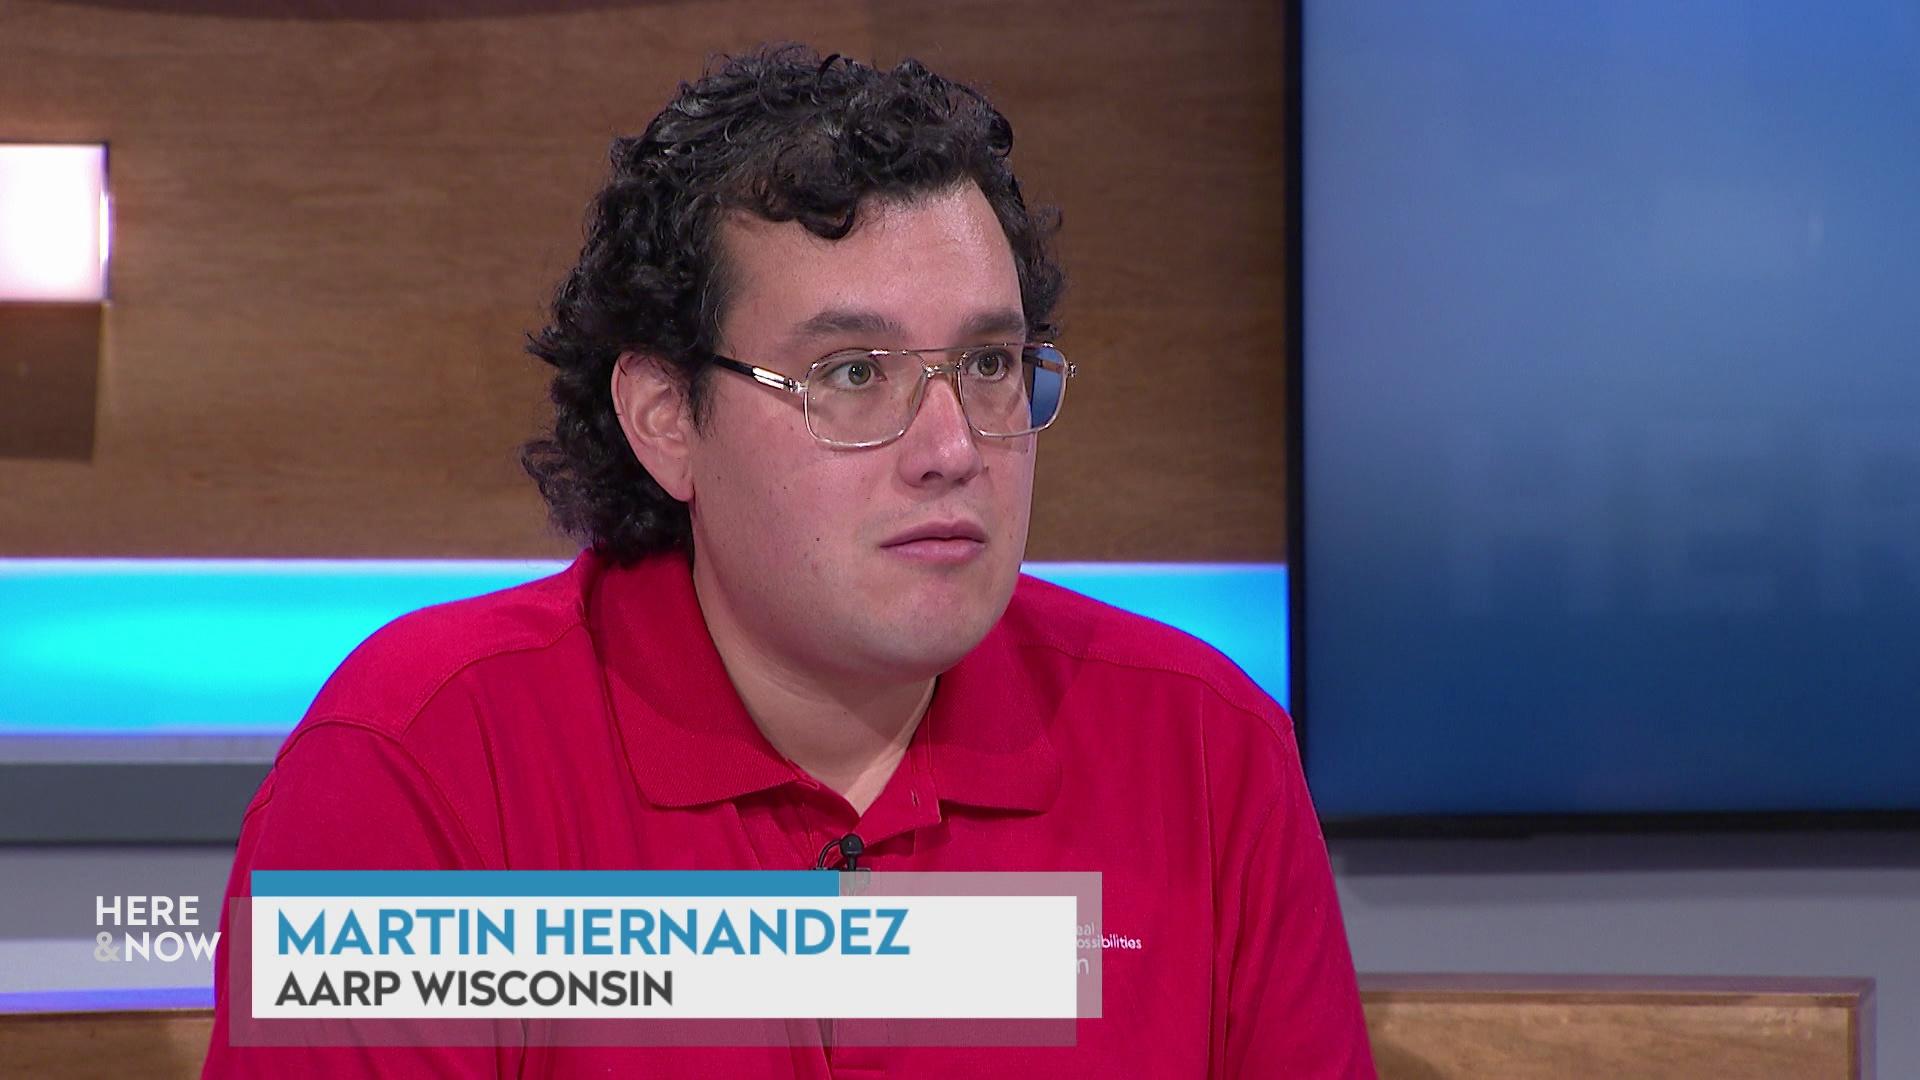 A still image shows Martin Hernandez seated at the 'Here & Now' set featuring wood paneling, with a graphic at bottom reading 'Martin Hernandez' and 'AARP Wisconsin.'